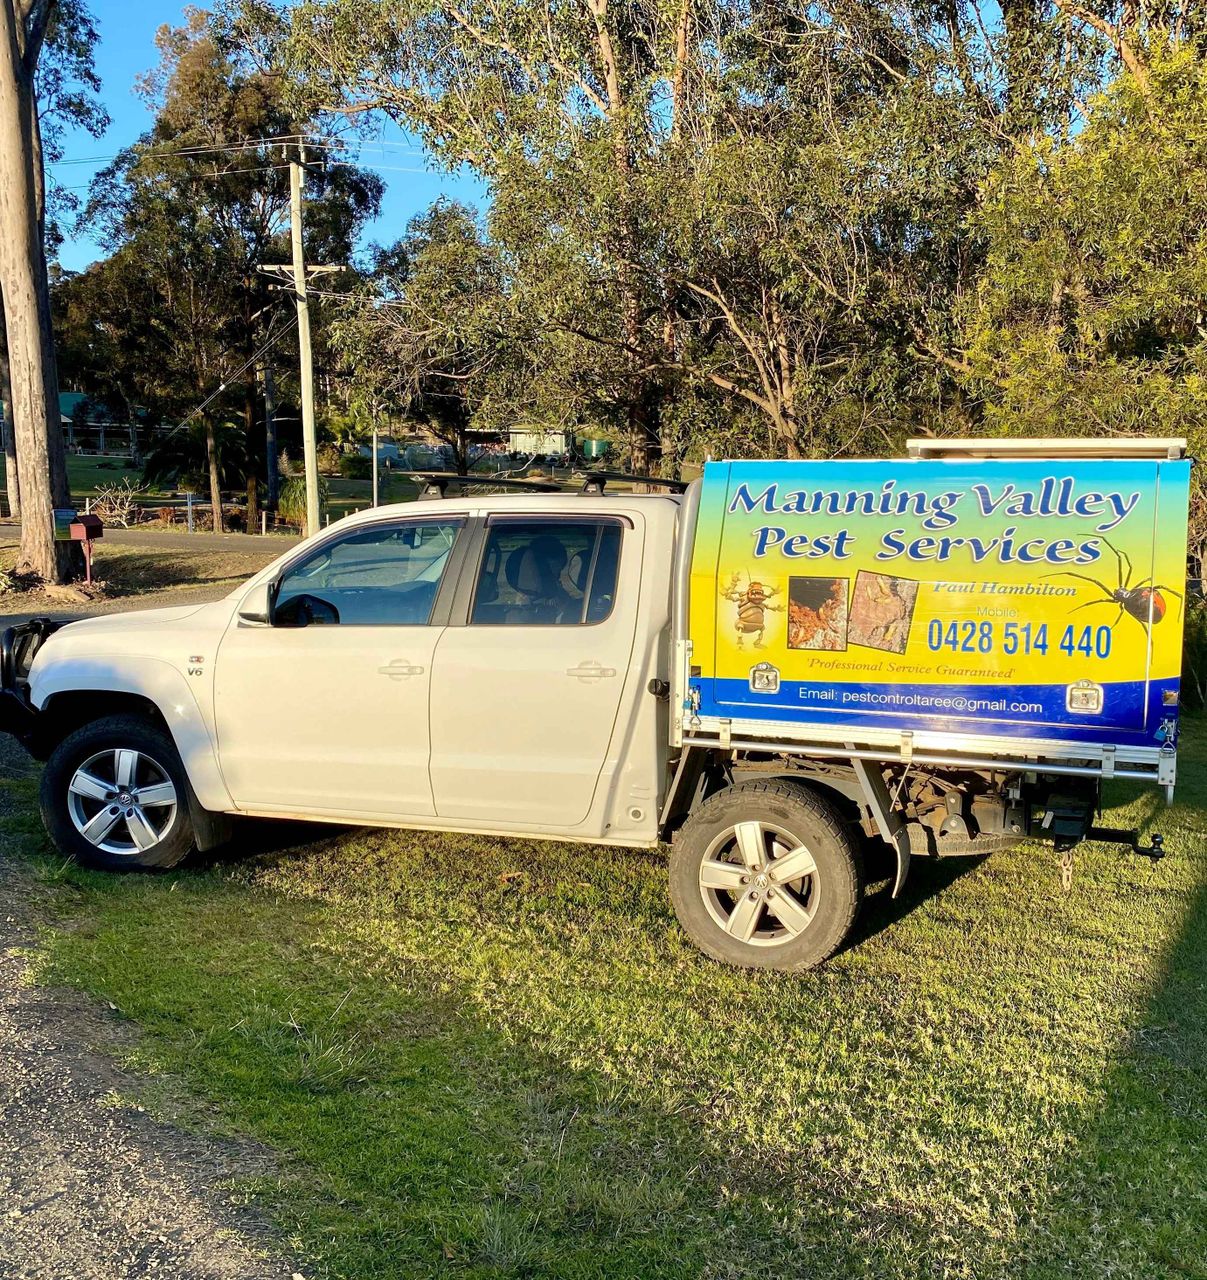 Manning Valley Pest Services image